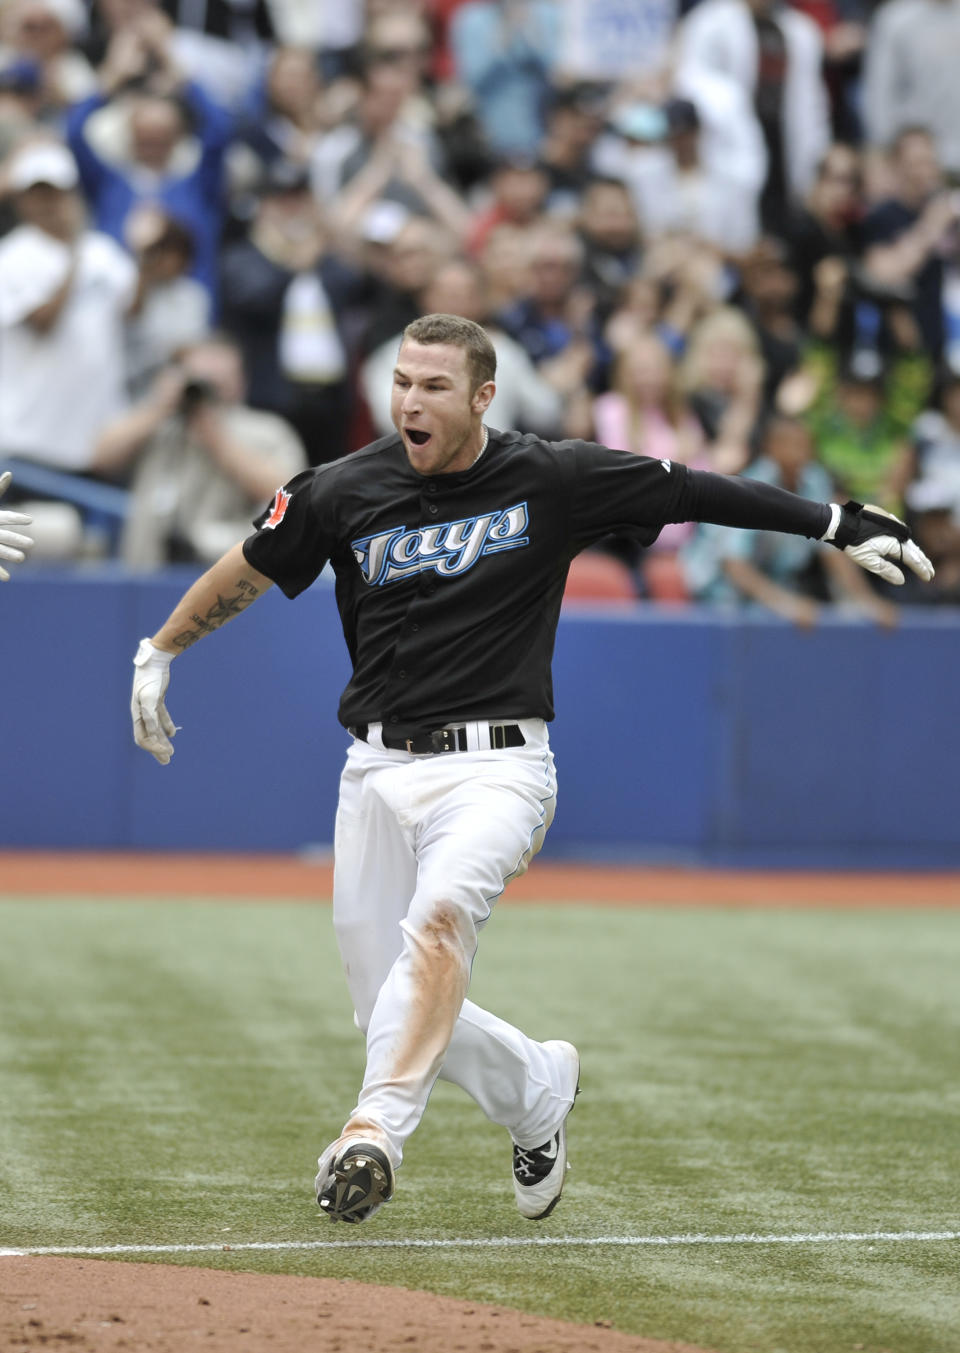 TORONTO, CANADA - SEPTEMBER 05: Brett Lawrie #13 of the Toronto Blue Jays celebrates his bottom of the 11th inning walk off home run during MLB game action against the Boston Red Sox September 5, 2011 at Rogers Centre in Toronto, Ontario, Canada. (Photo by Brad White/Getty Images)